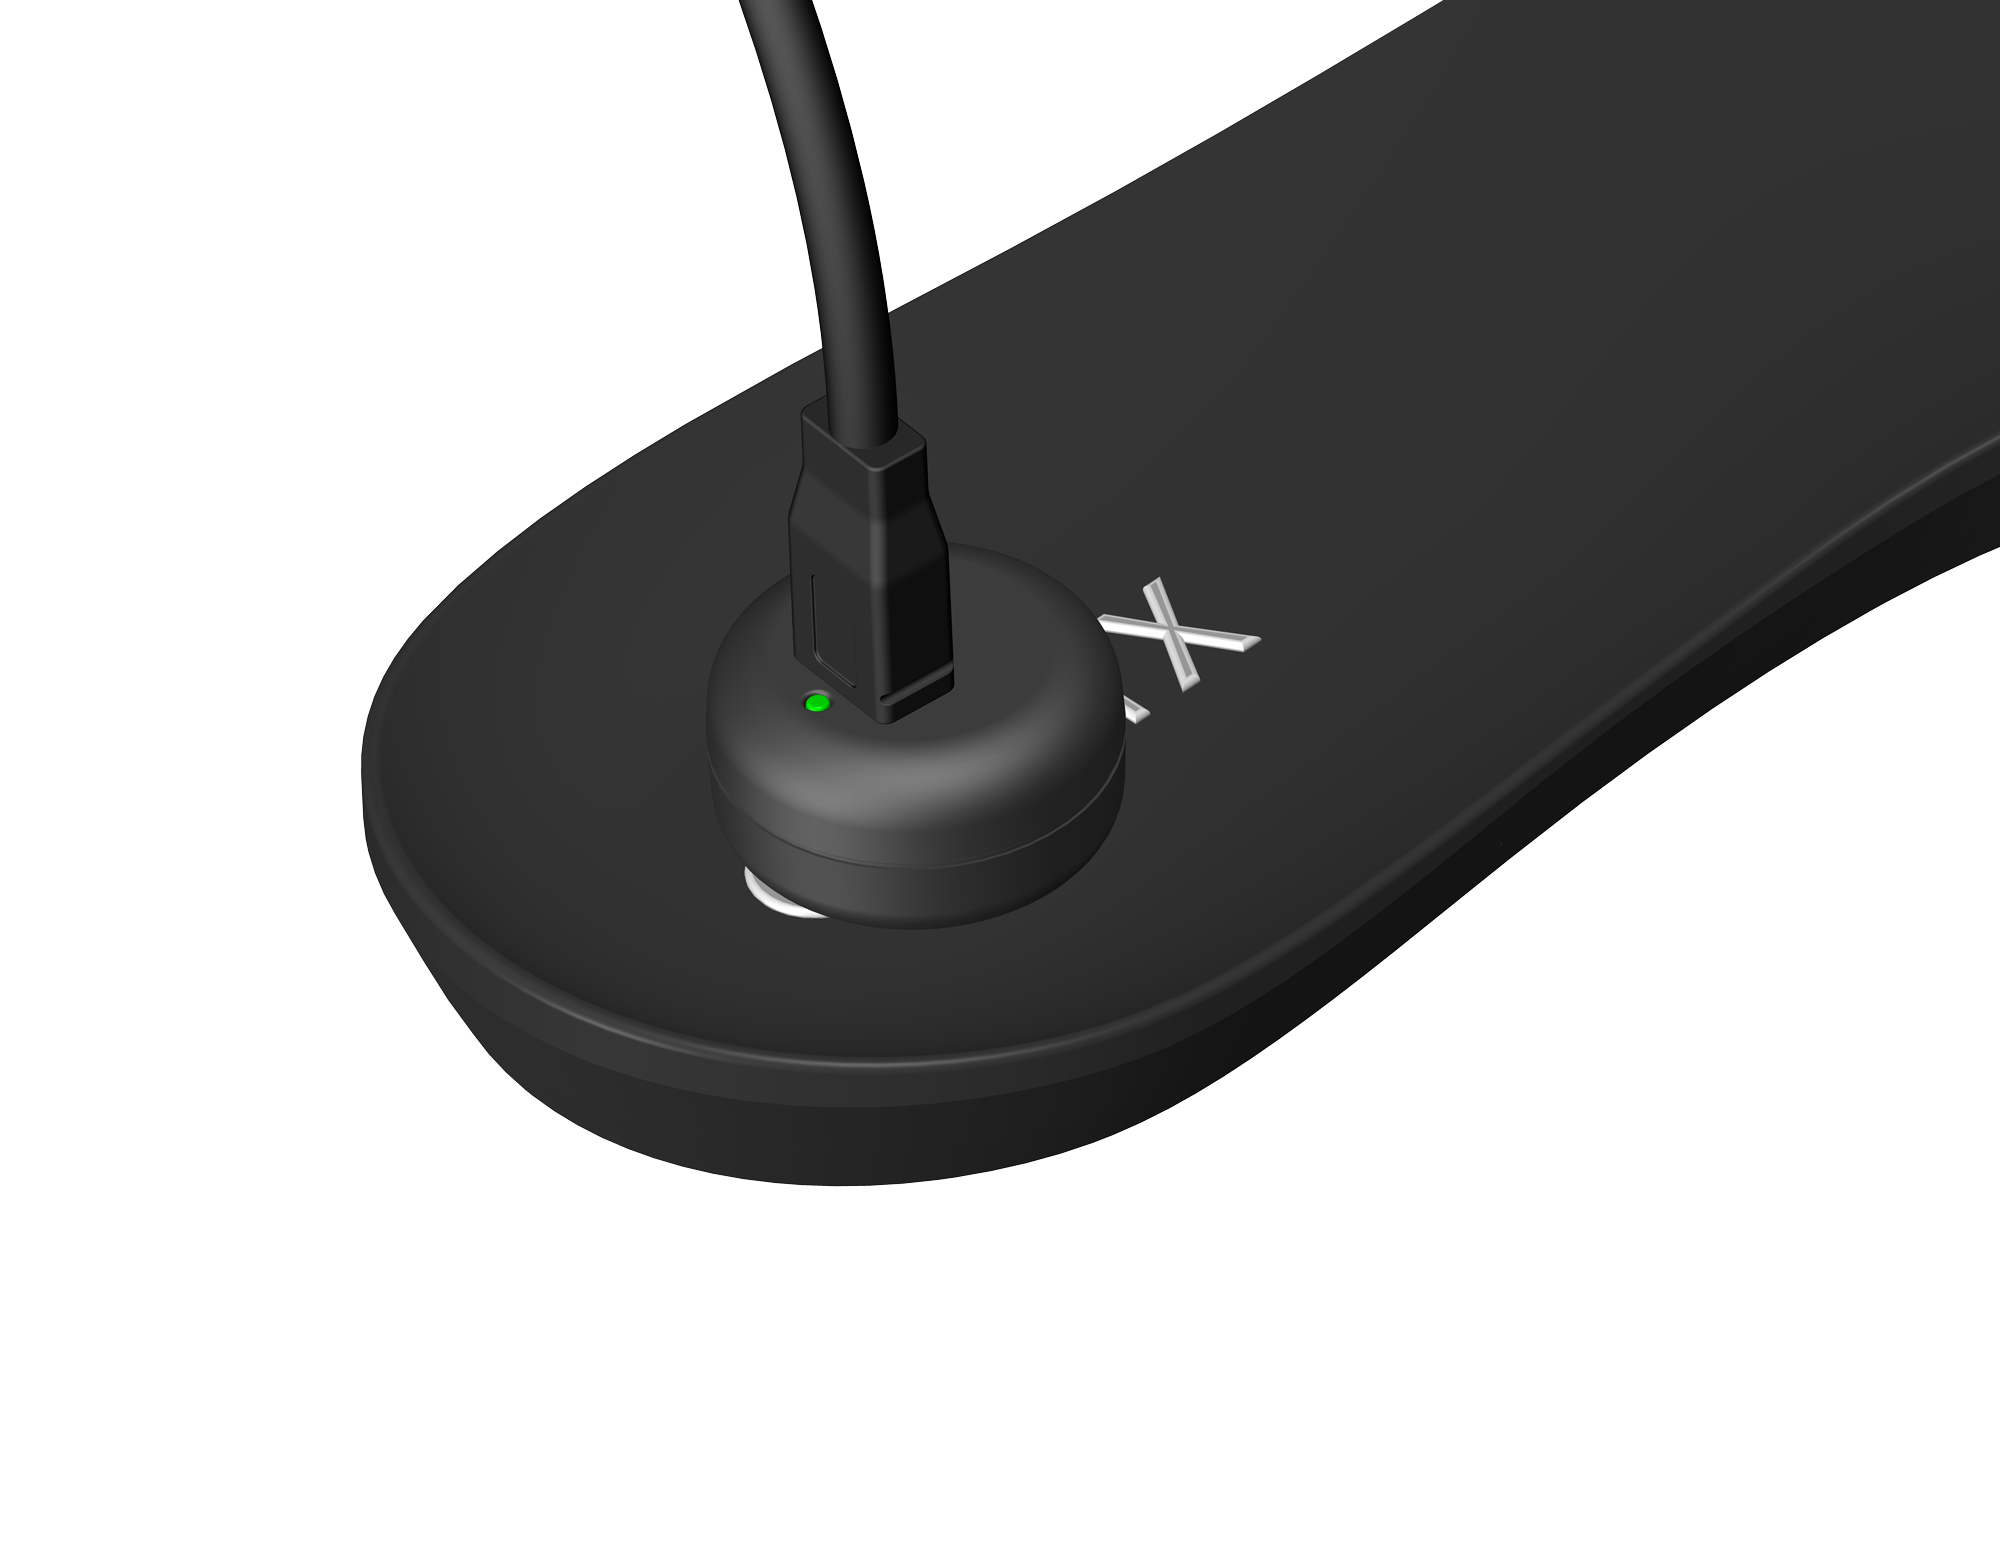 Insole-with-Charger-_Close-up_-green.png